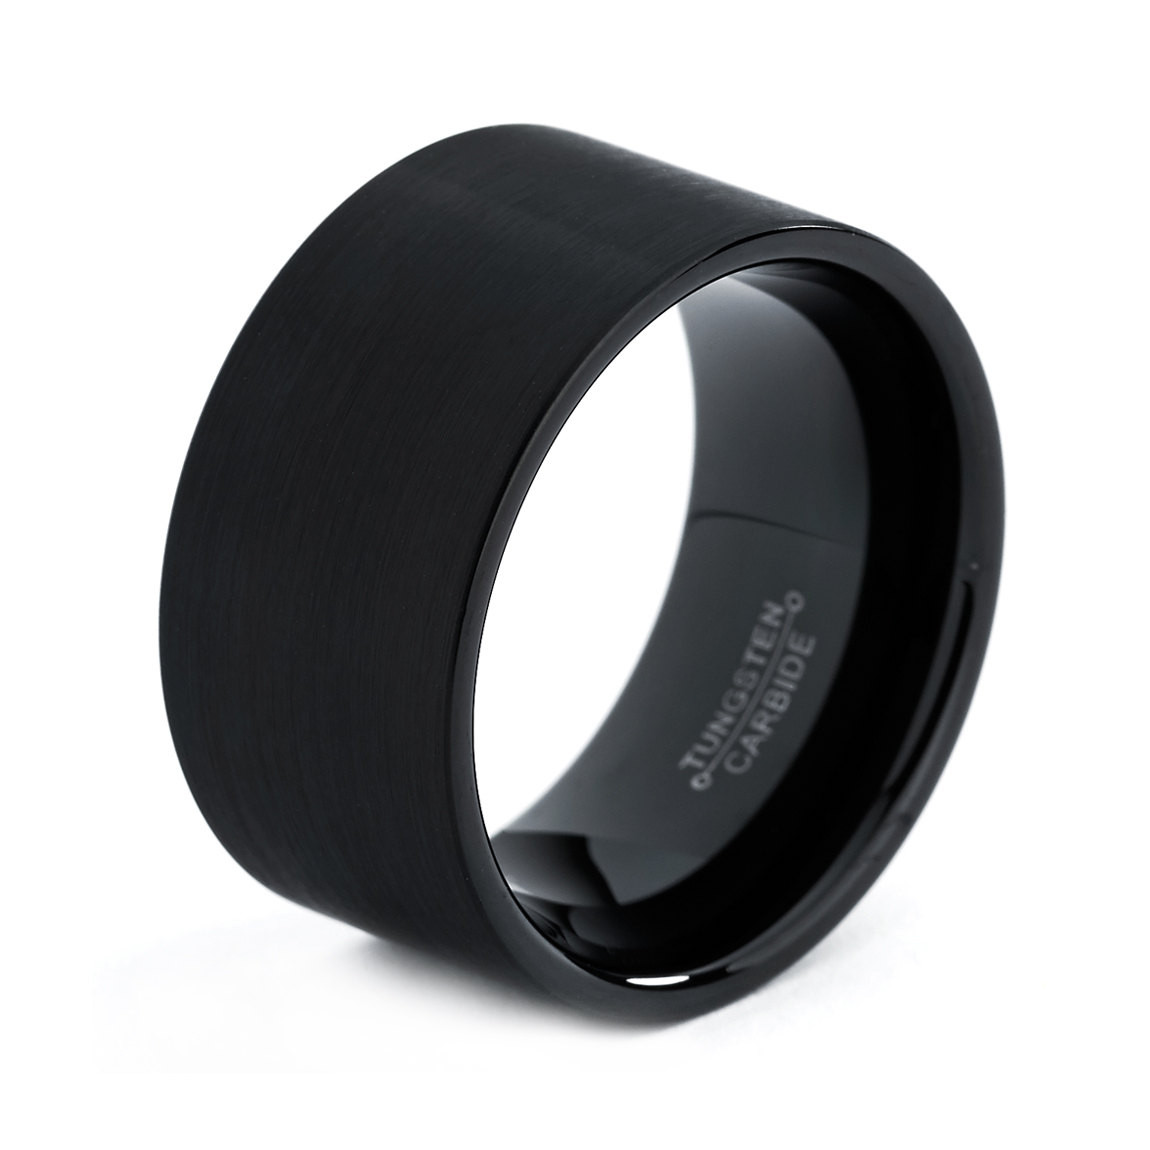 Black Mens Wedding Ring
 Keep these Points in Mind When Picking Men’s Wedding Bands